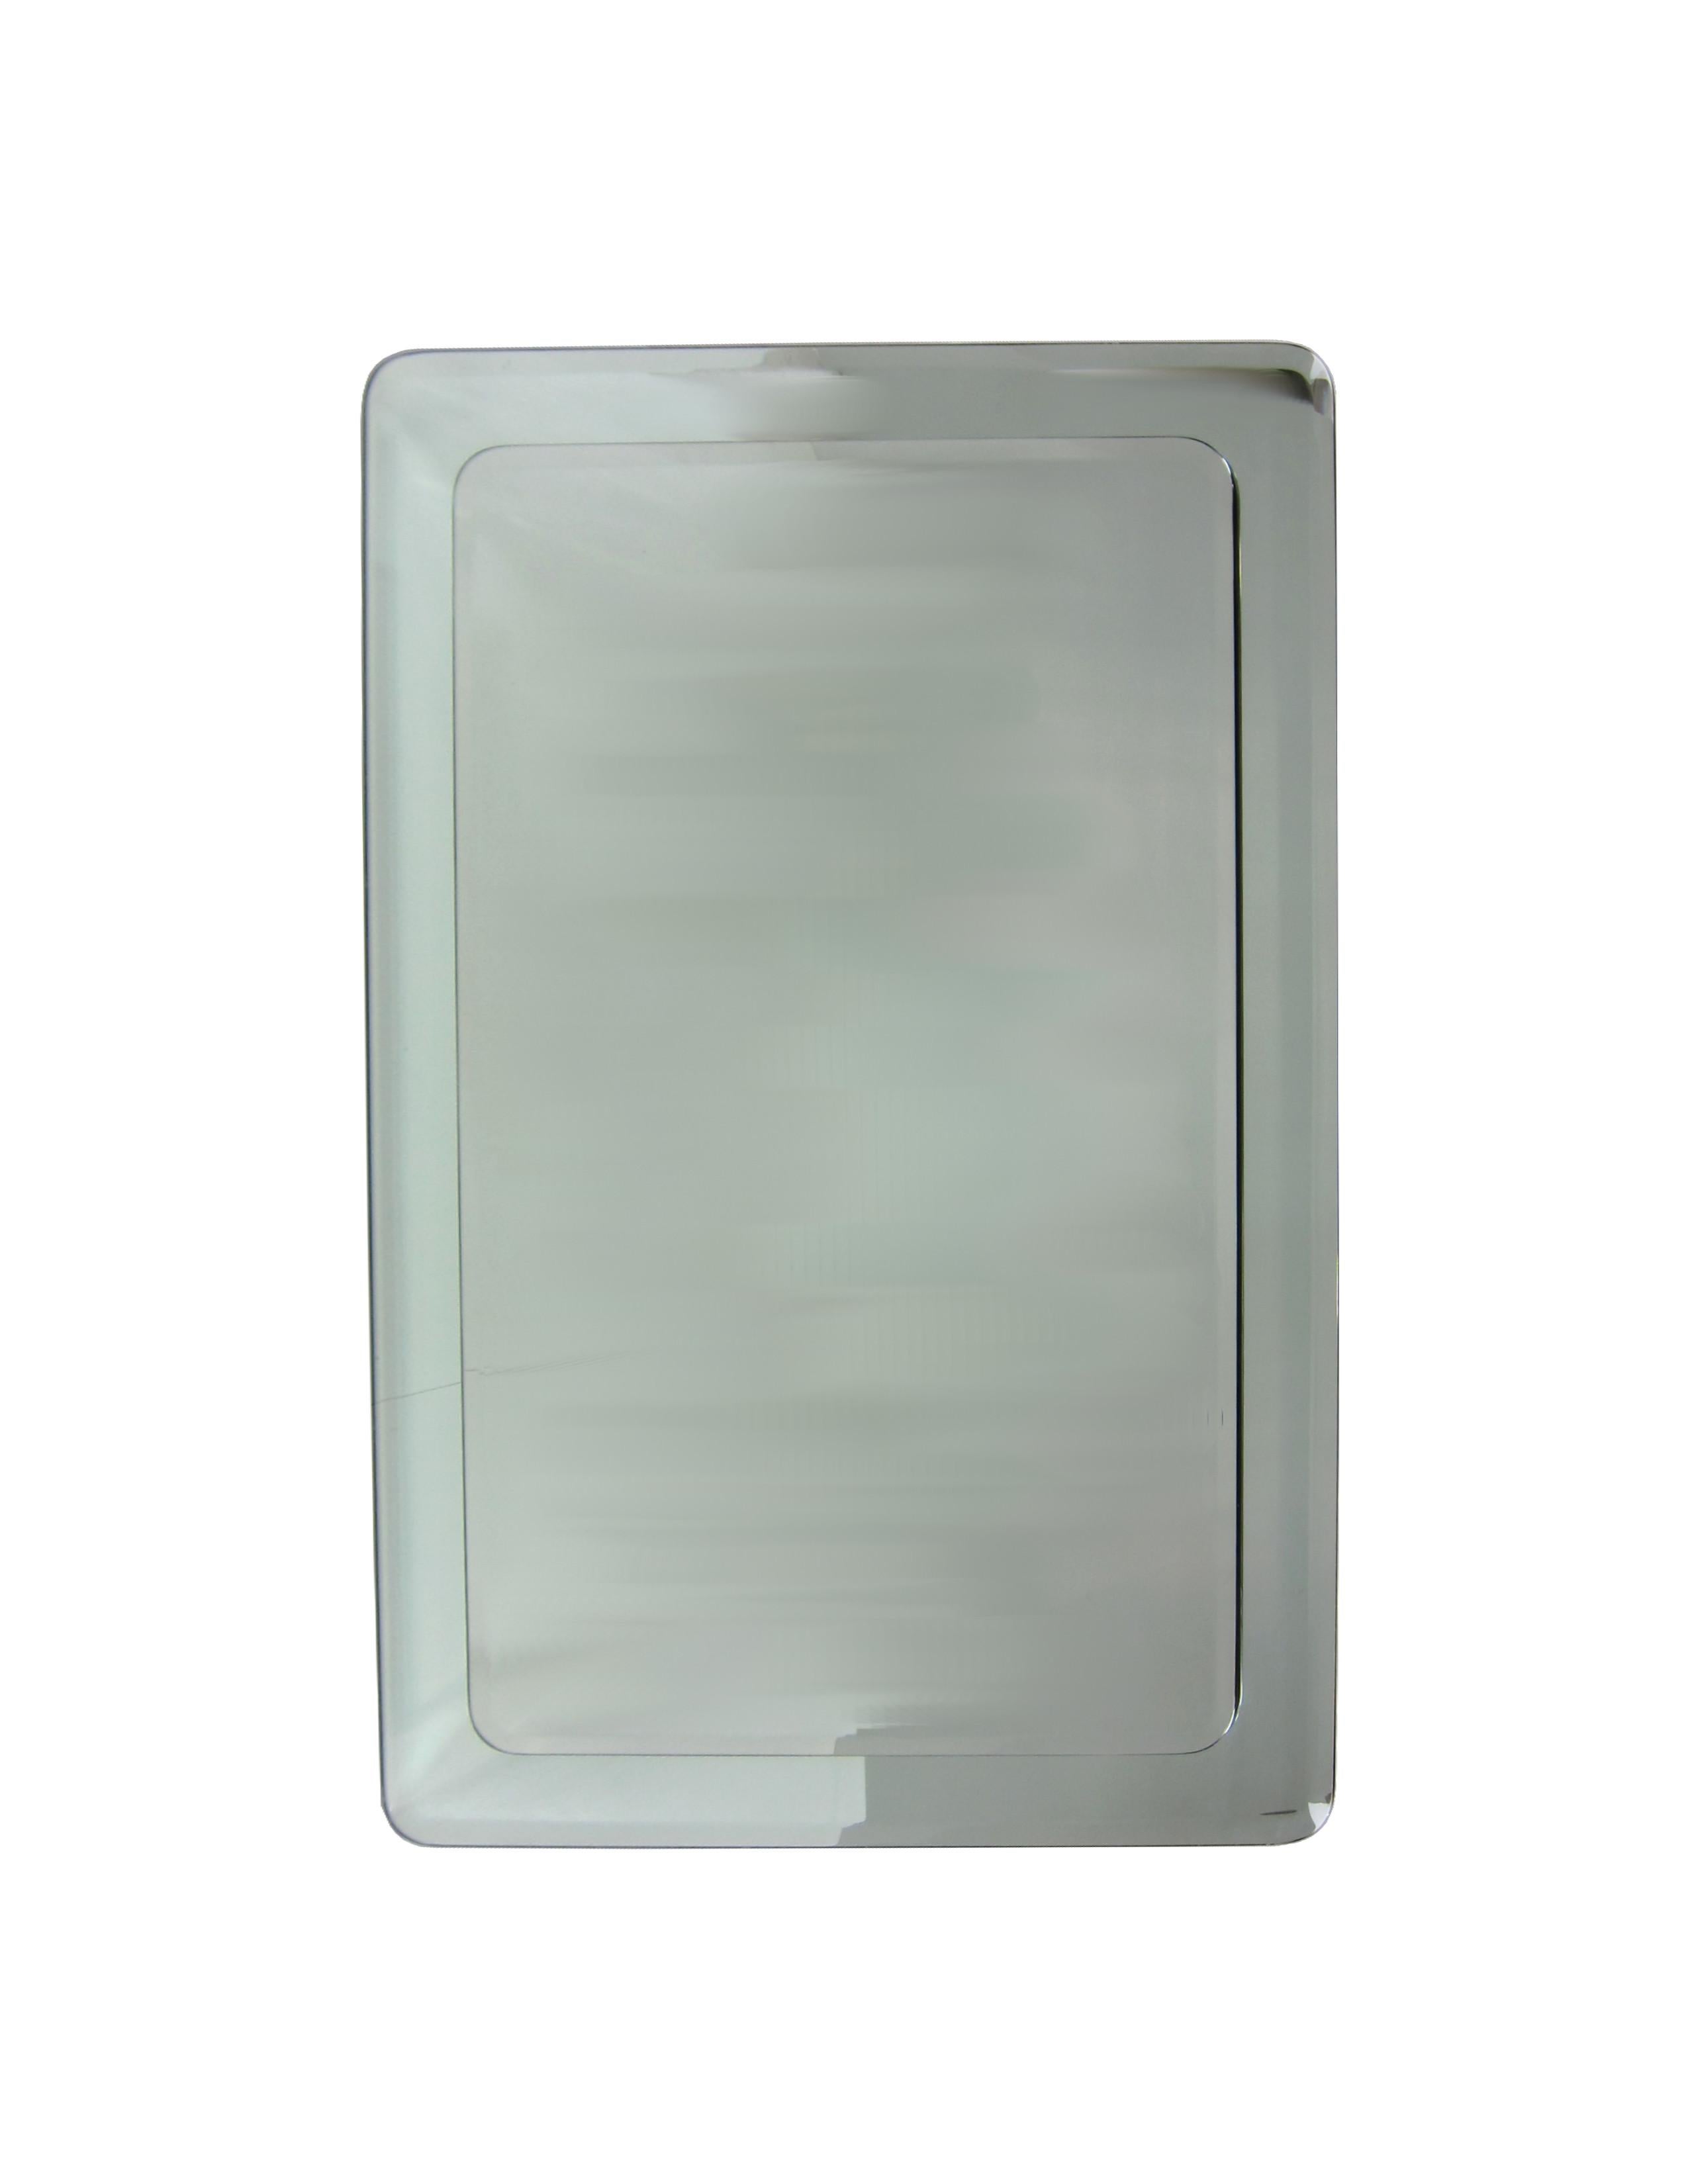 Impressive bevelled rectangular mirror with radiused corners framed by a larger mirror. Back panel has inset hardware for hanging either vertical or horizontal. Top quality materials and workmanship.